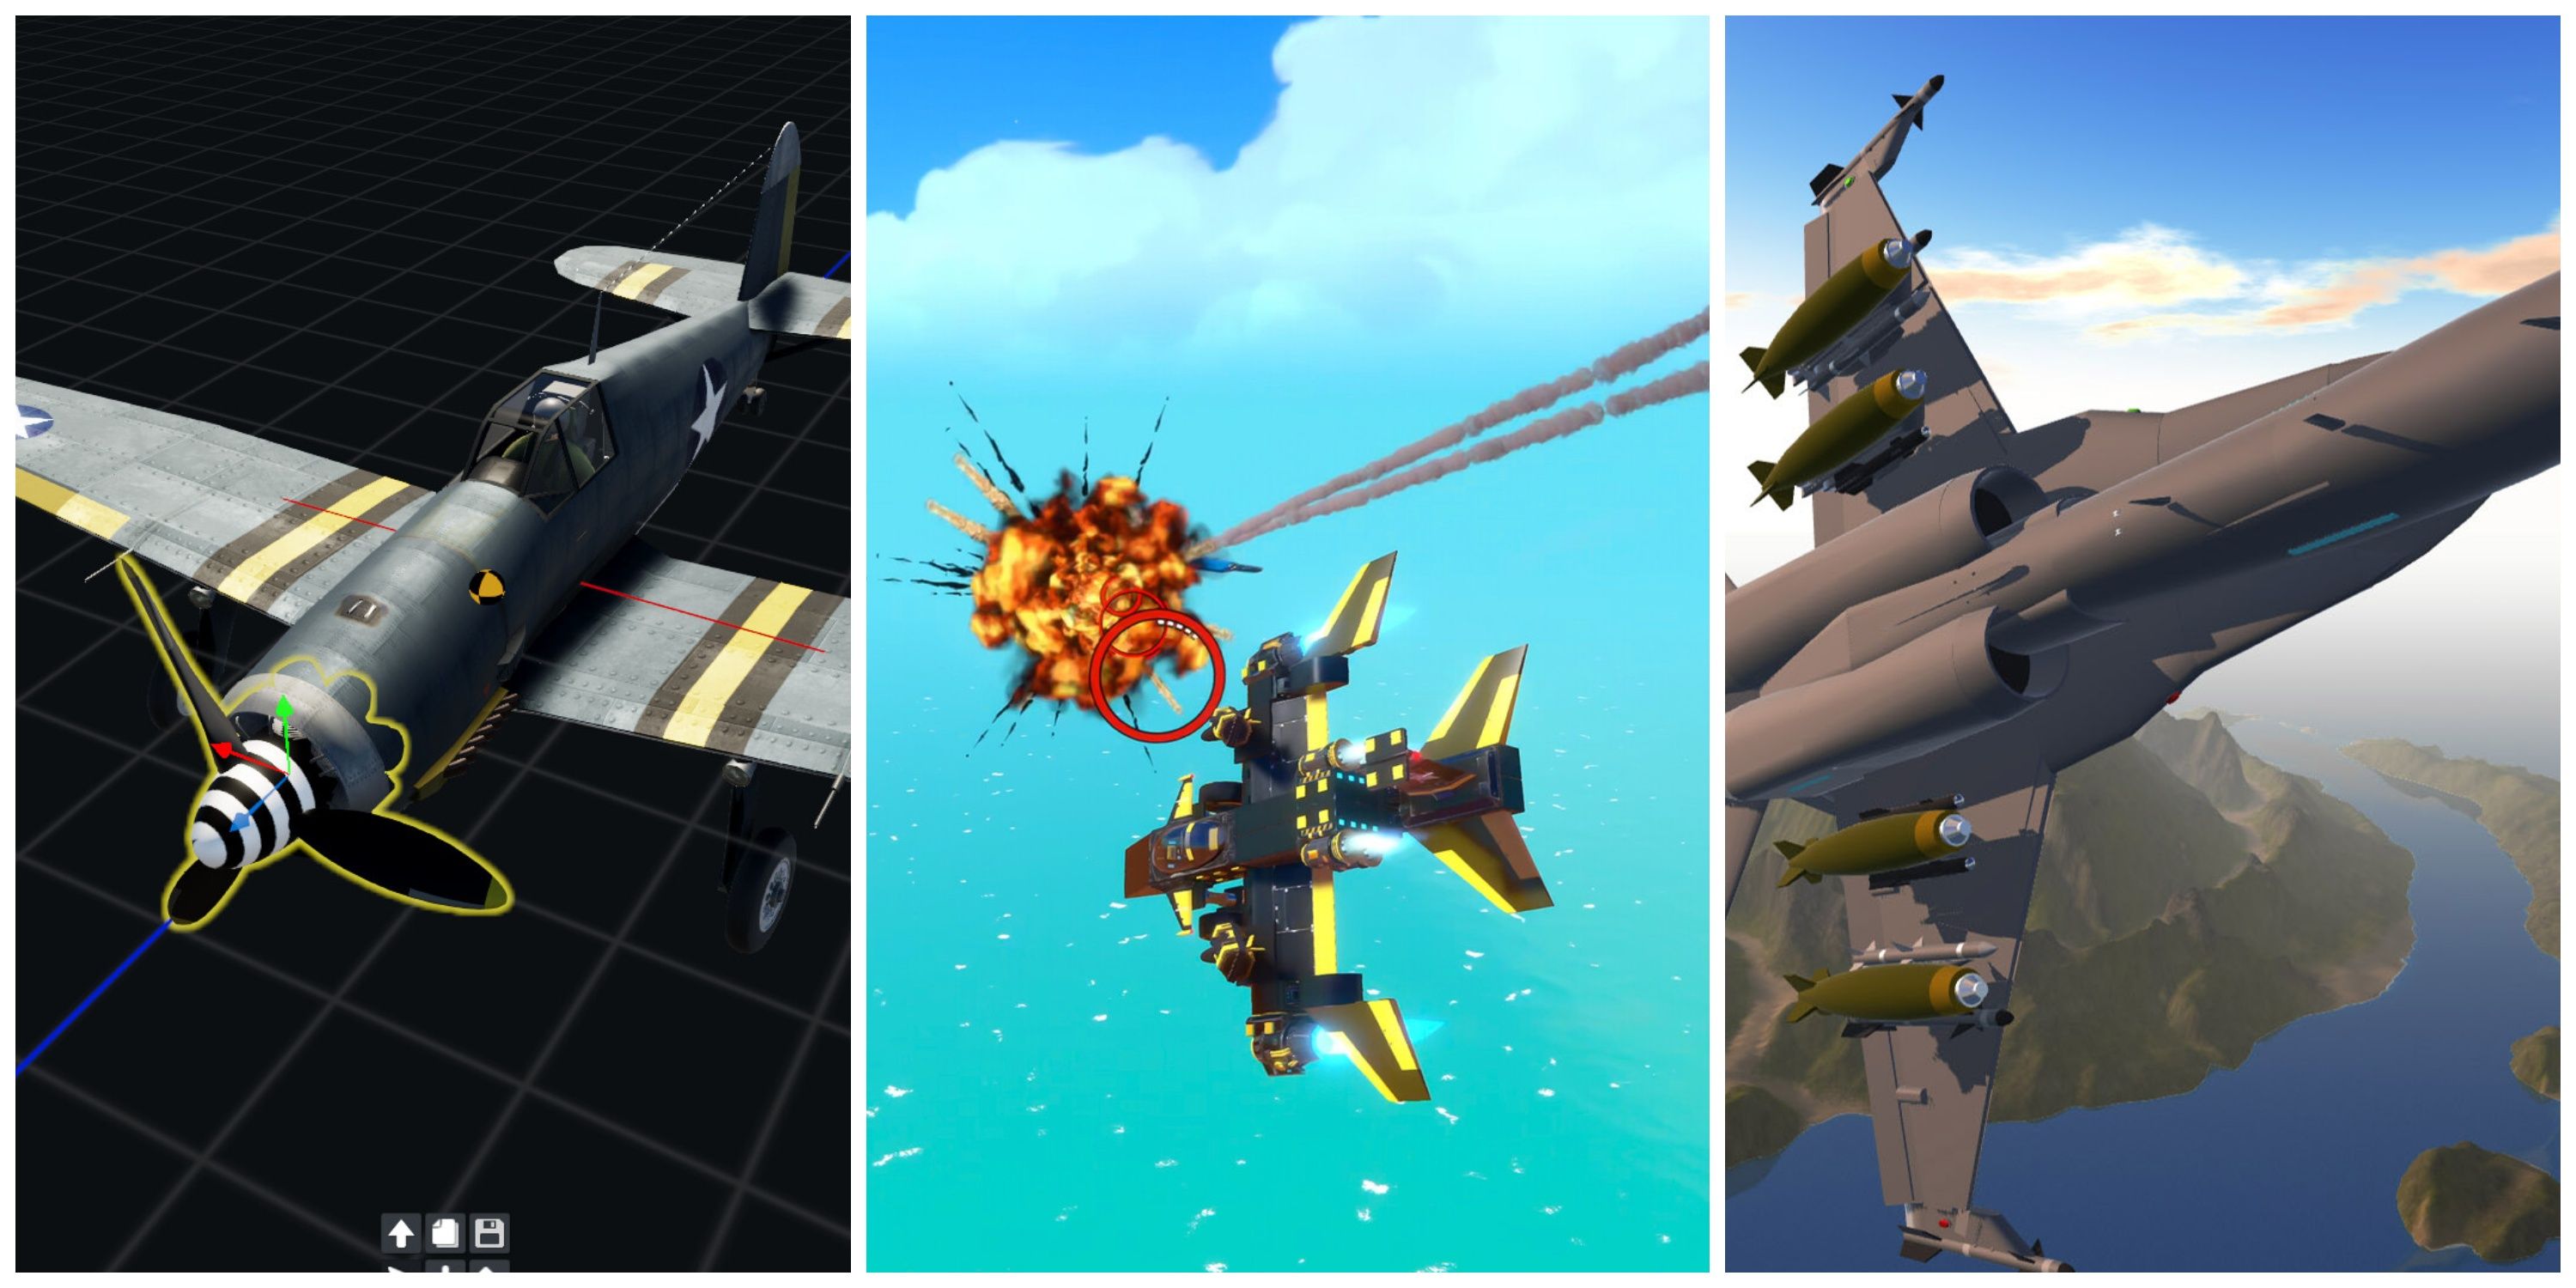 Games That Let You Build A Plane (Featured Image) - Flyout + Trailmakers + SimplePlanes